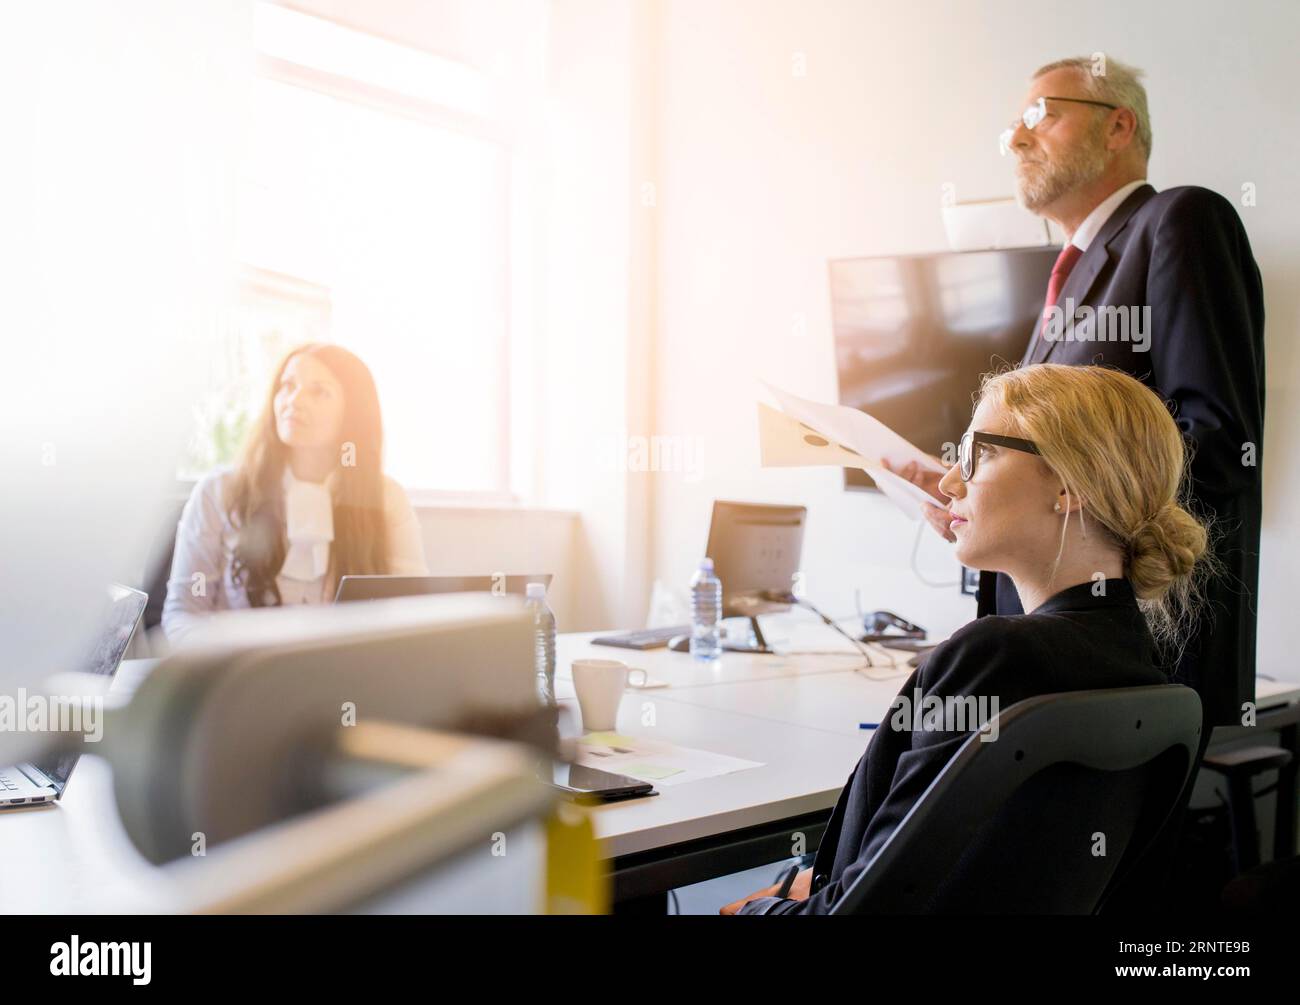 Group businesspeople attending presentation office Stock Photo